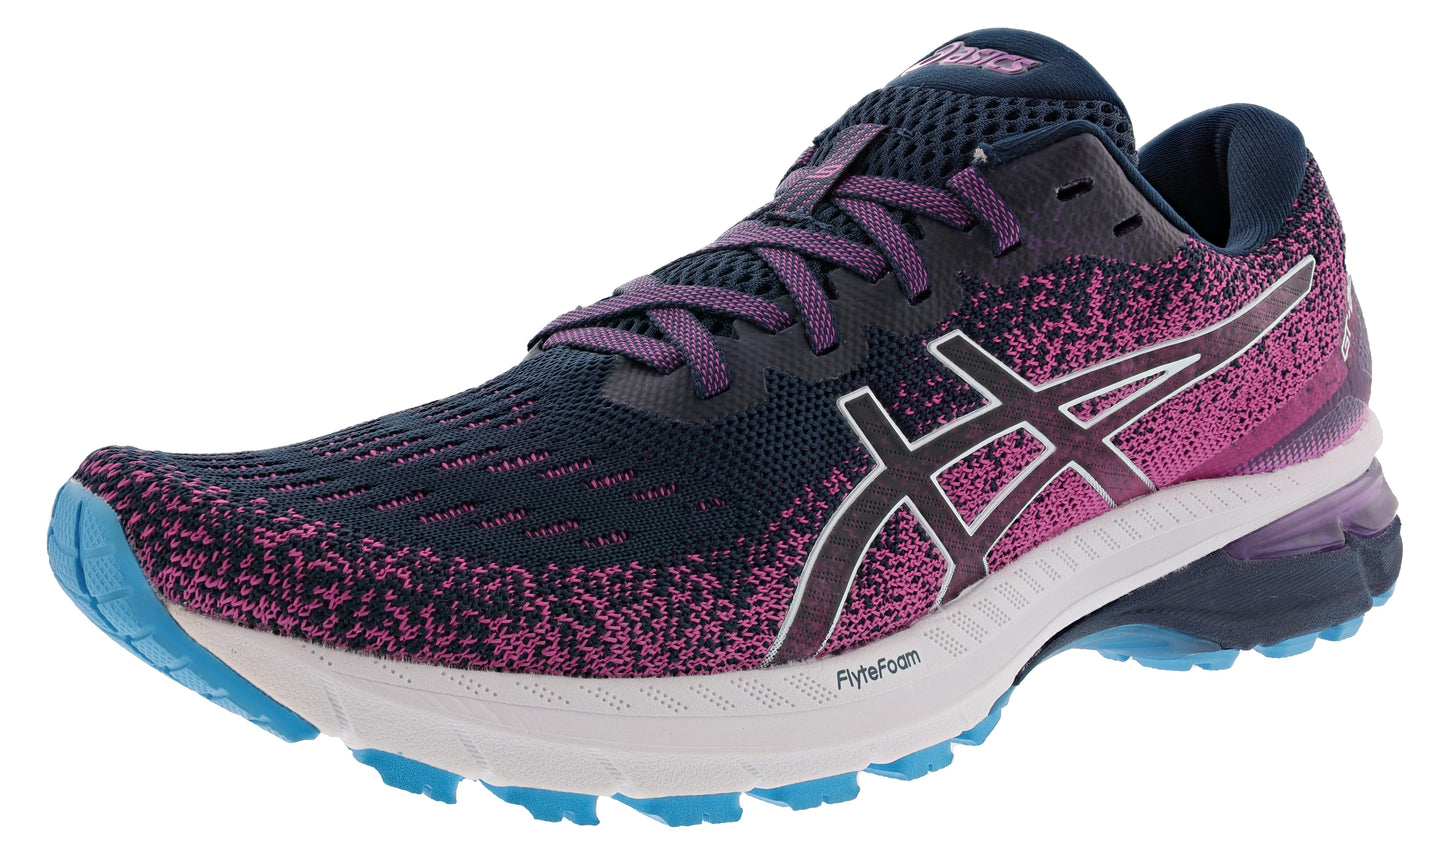 Lateral of French Blue/White ASICS Women Cushioned Running Shoes GT 2000 9 Knit